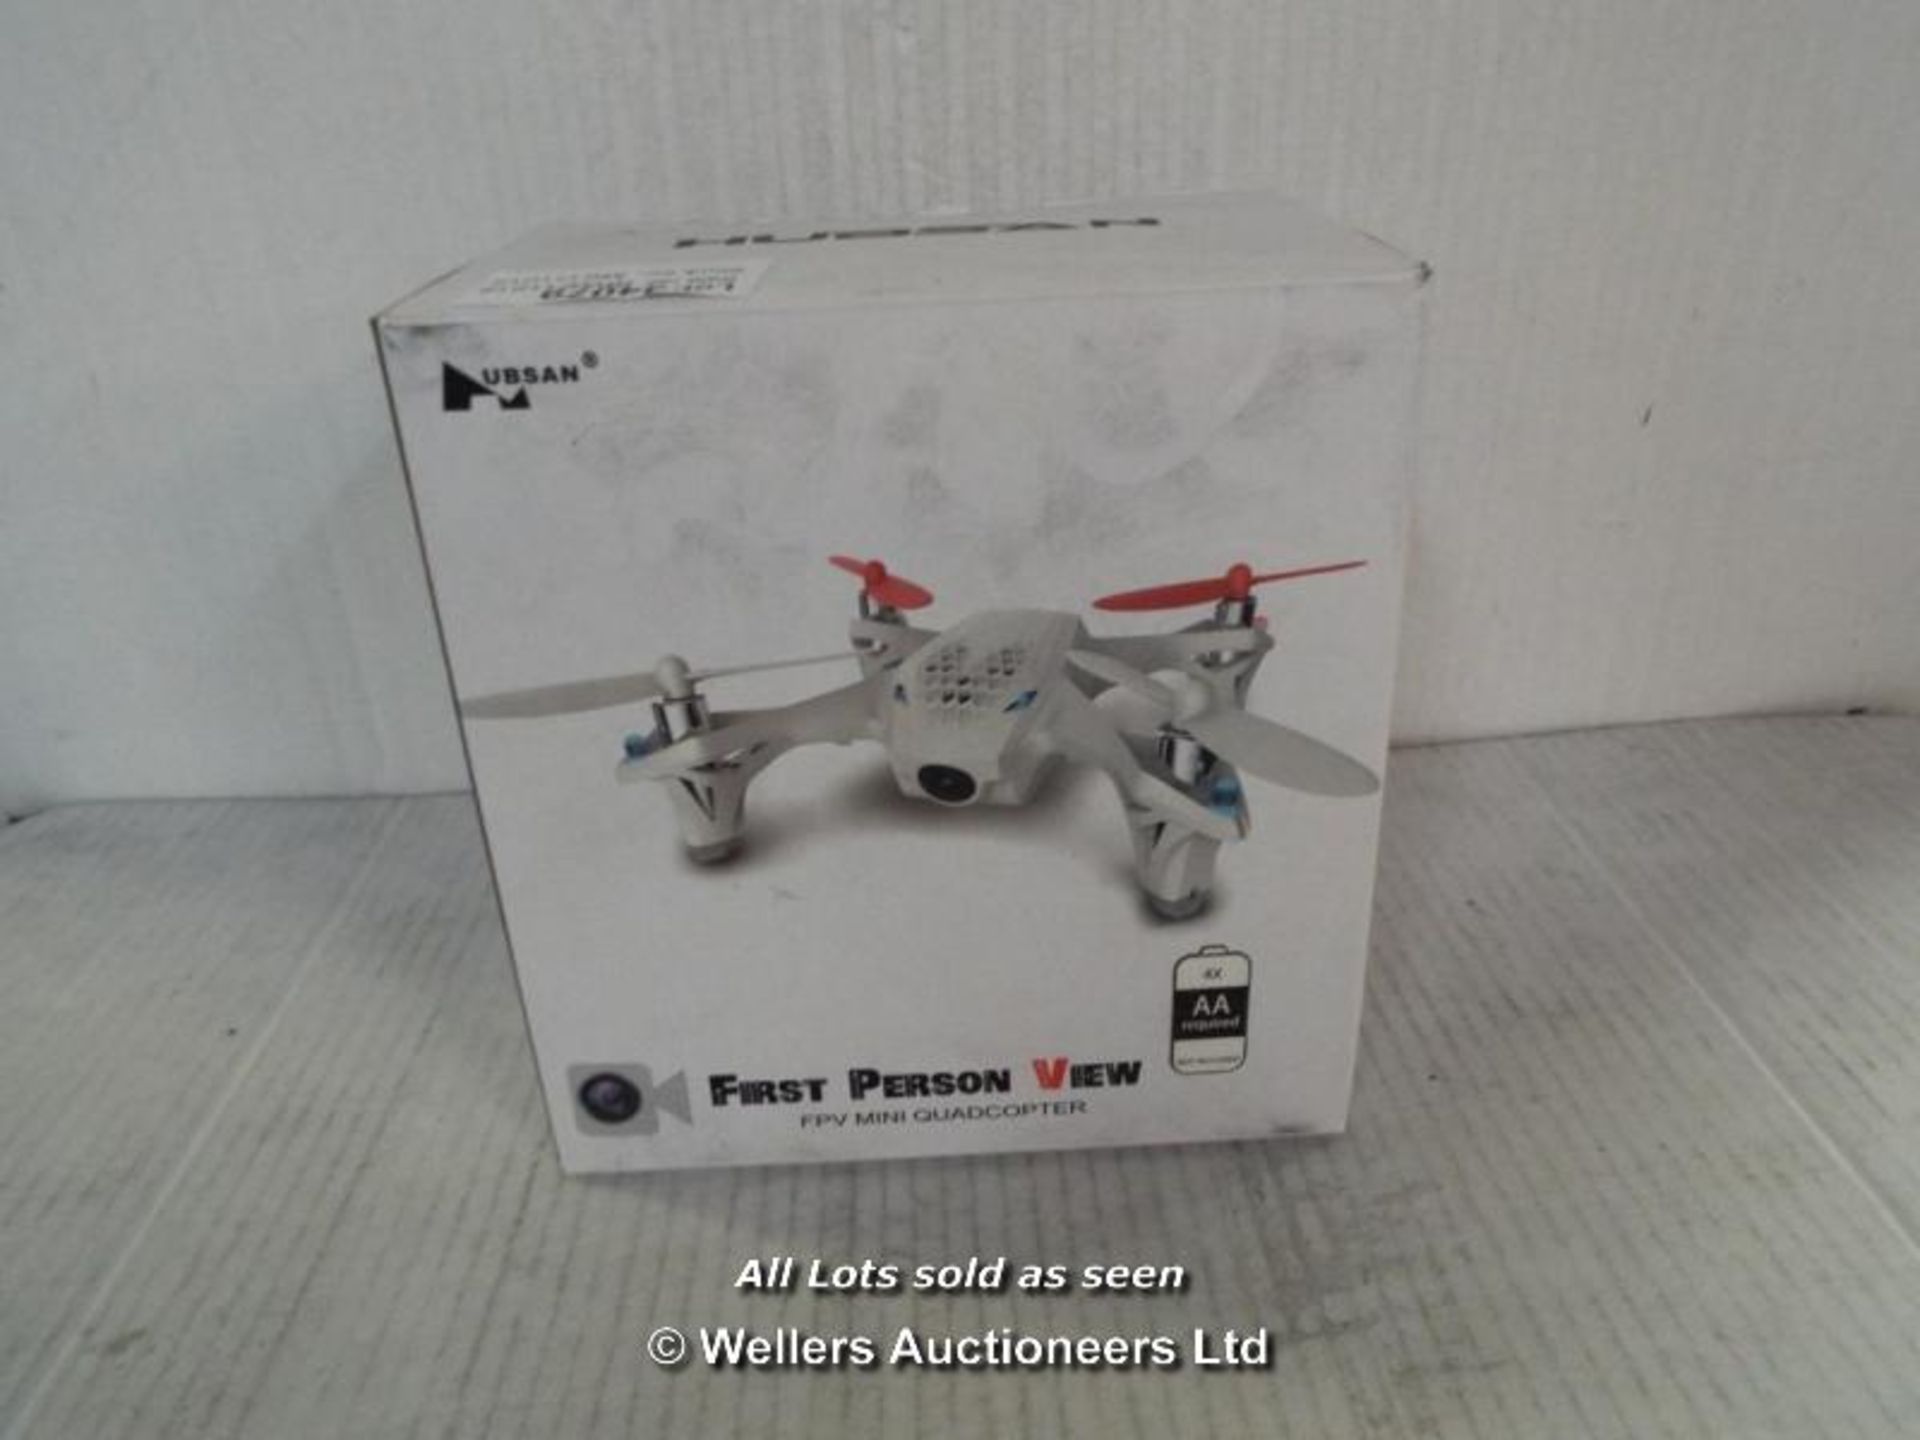 HUBSAN H107D FPV X4 RC QUADCOPTER WITH CAMERA N72DG / GRADE: RETURNS / BOXED (DC2) [AISLE 19] - Image 2 of 2